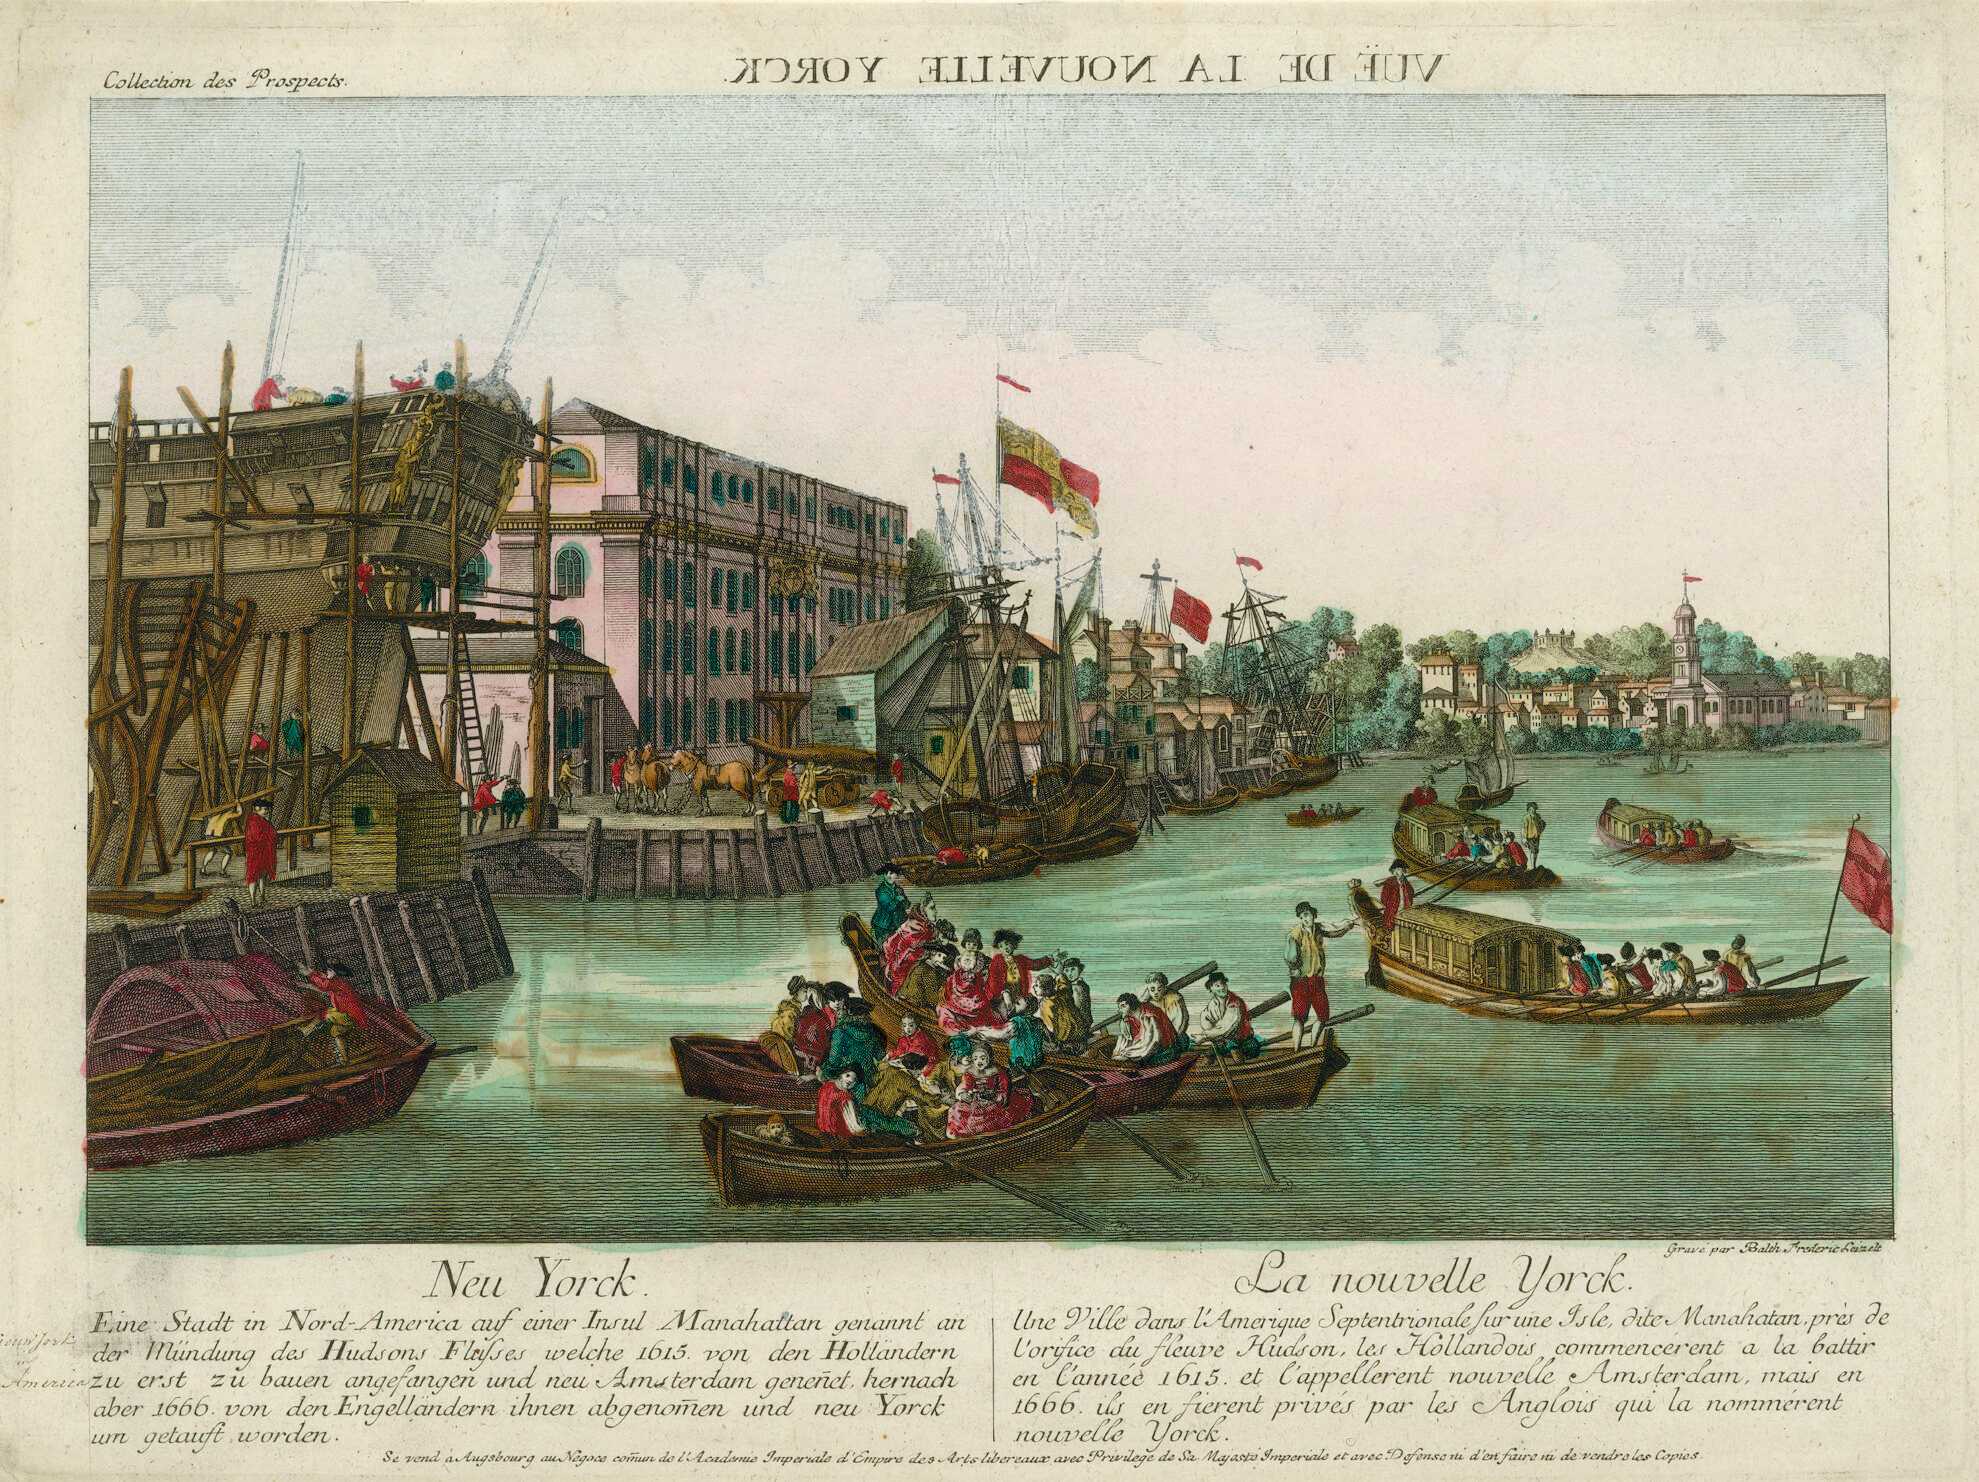 Painting of the Port of New York in the 1700s